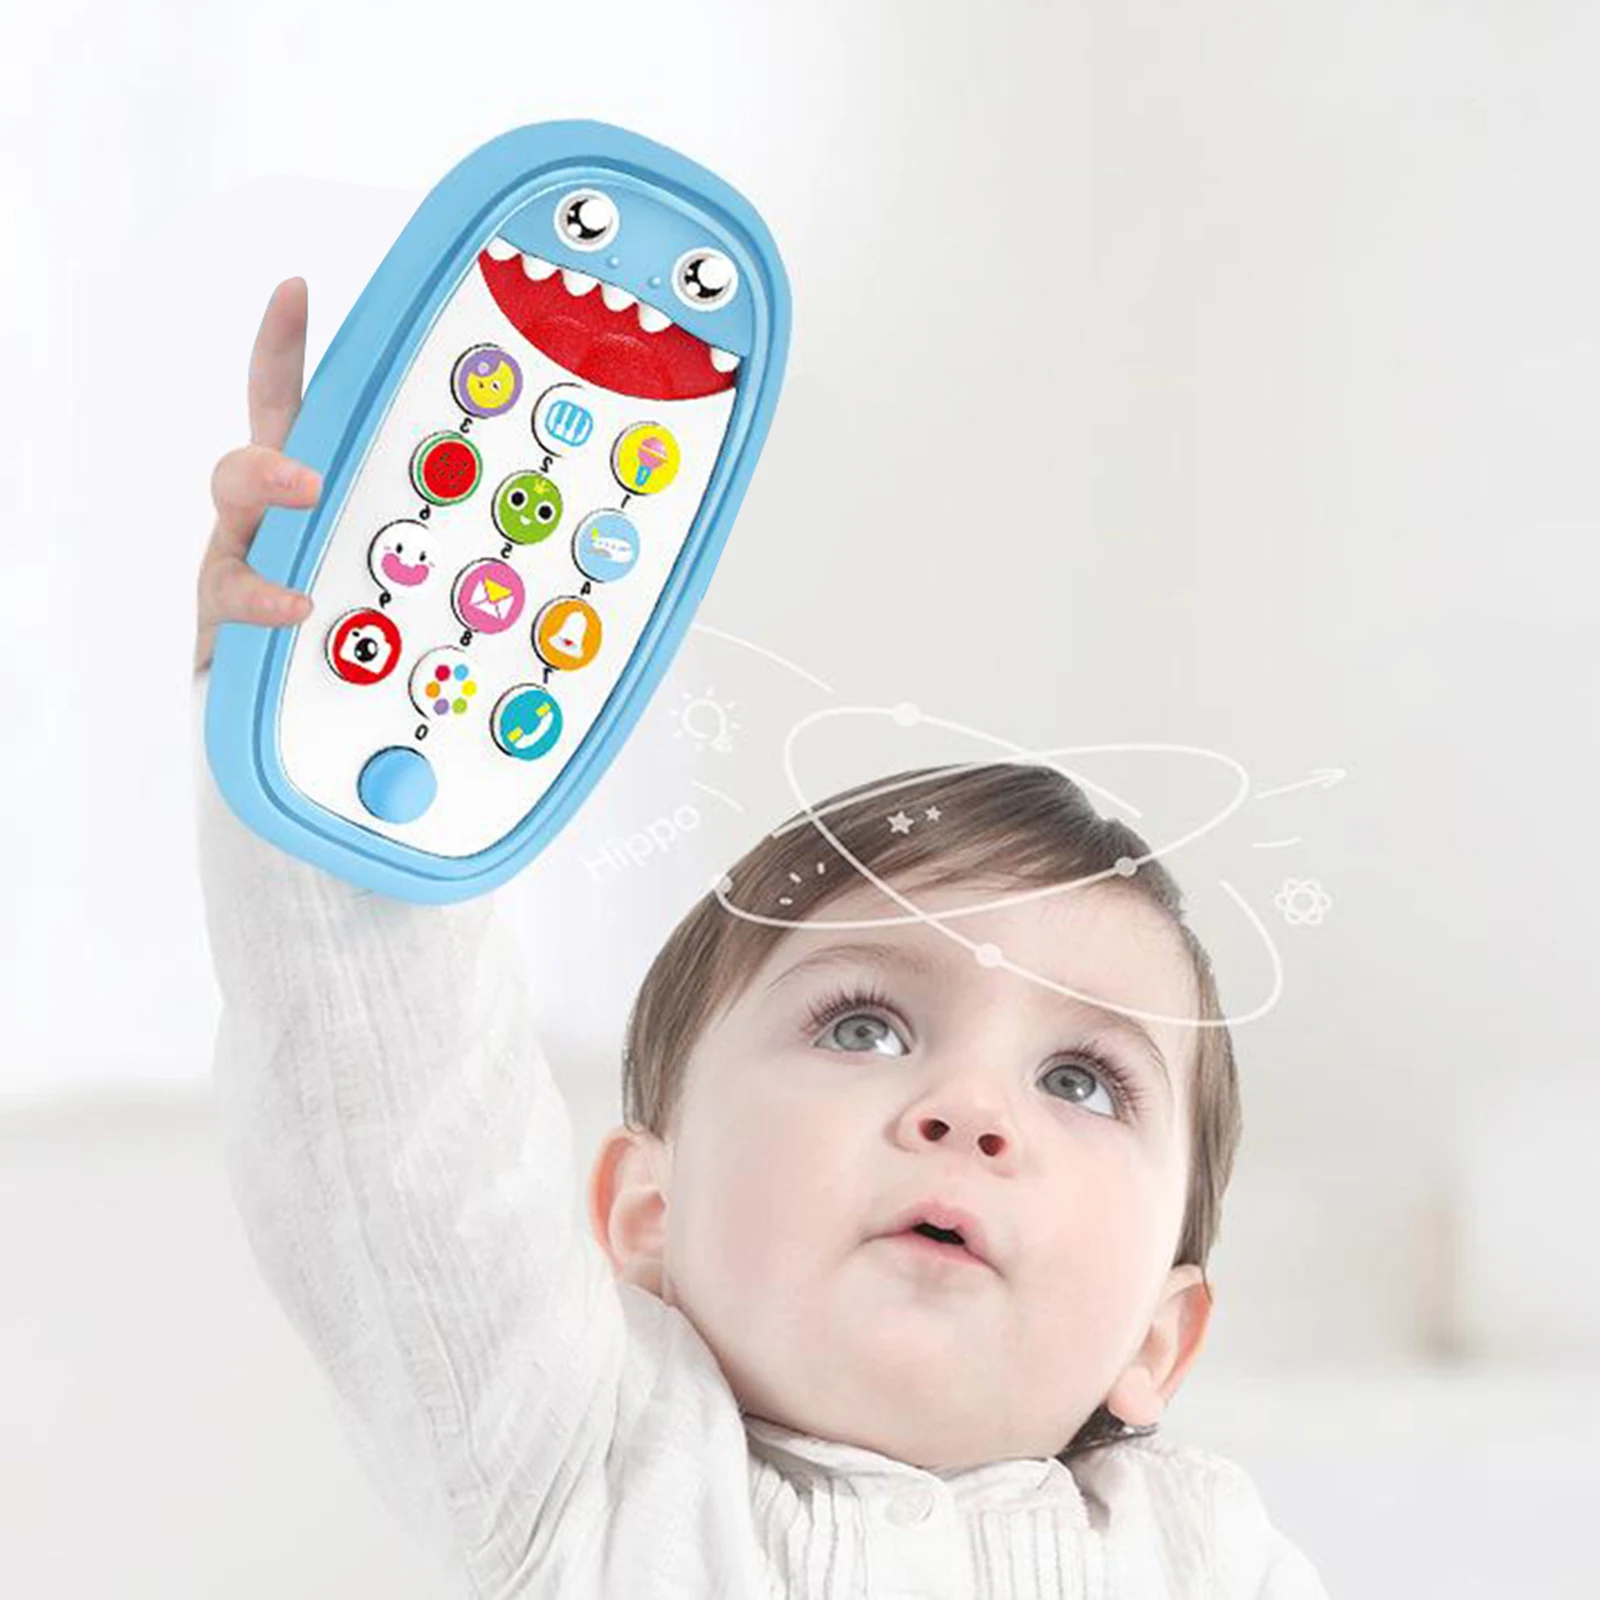 Infants Shark Music Phone Toys Lights Music Play And Learn 6+ Months